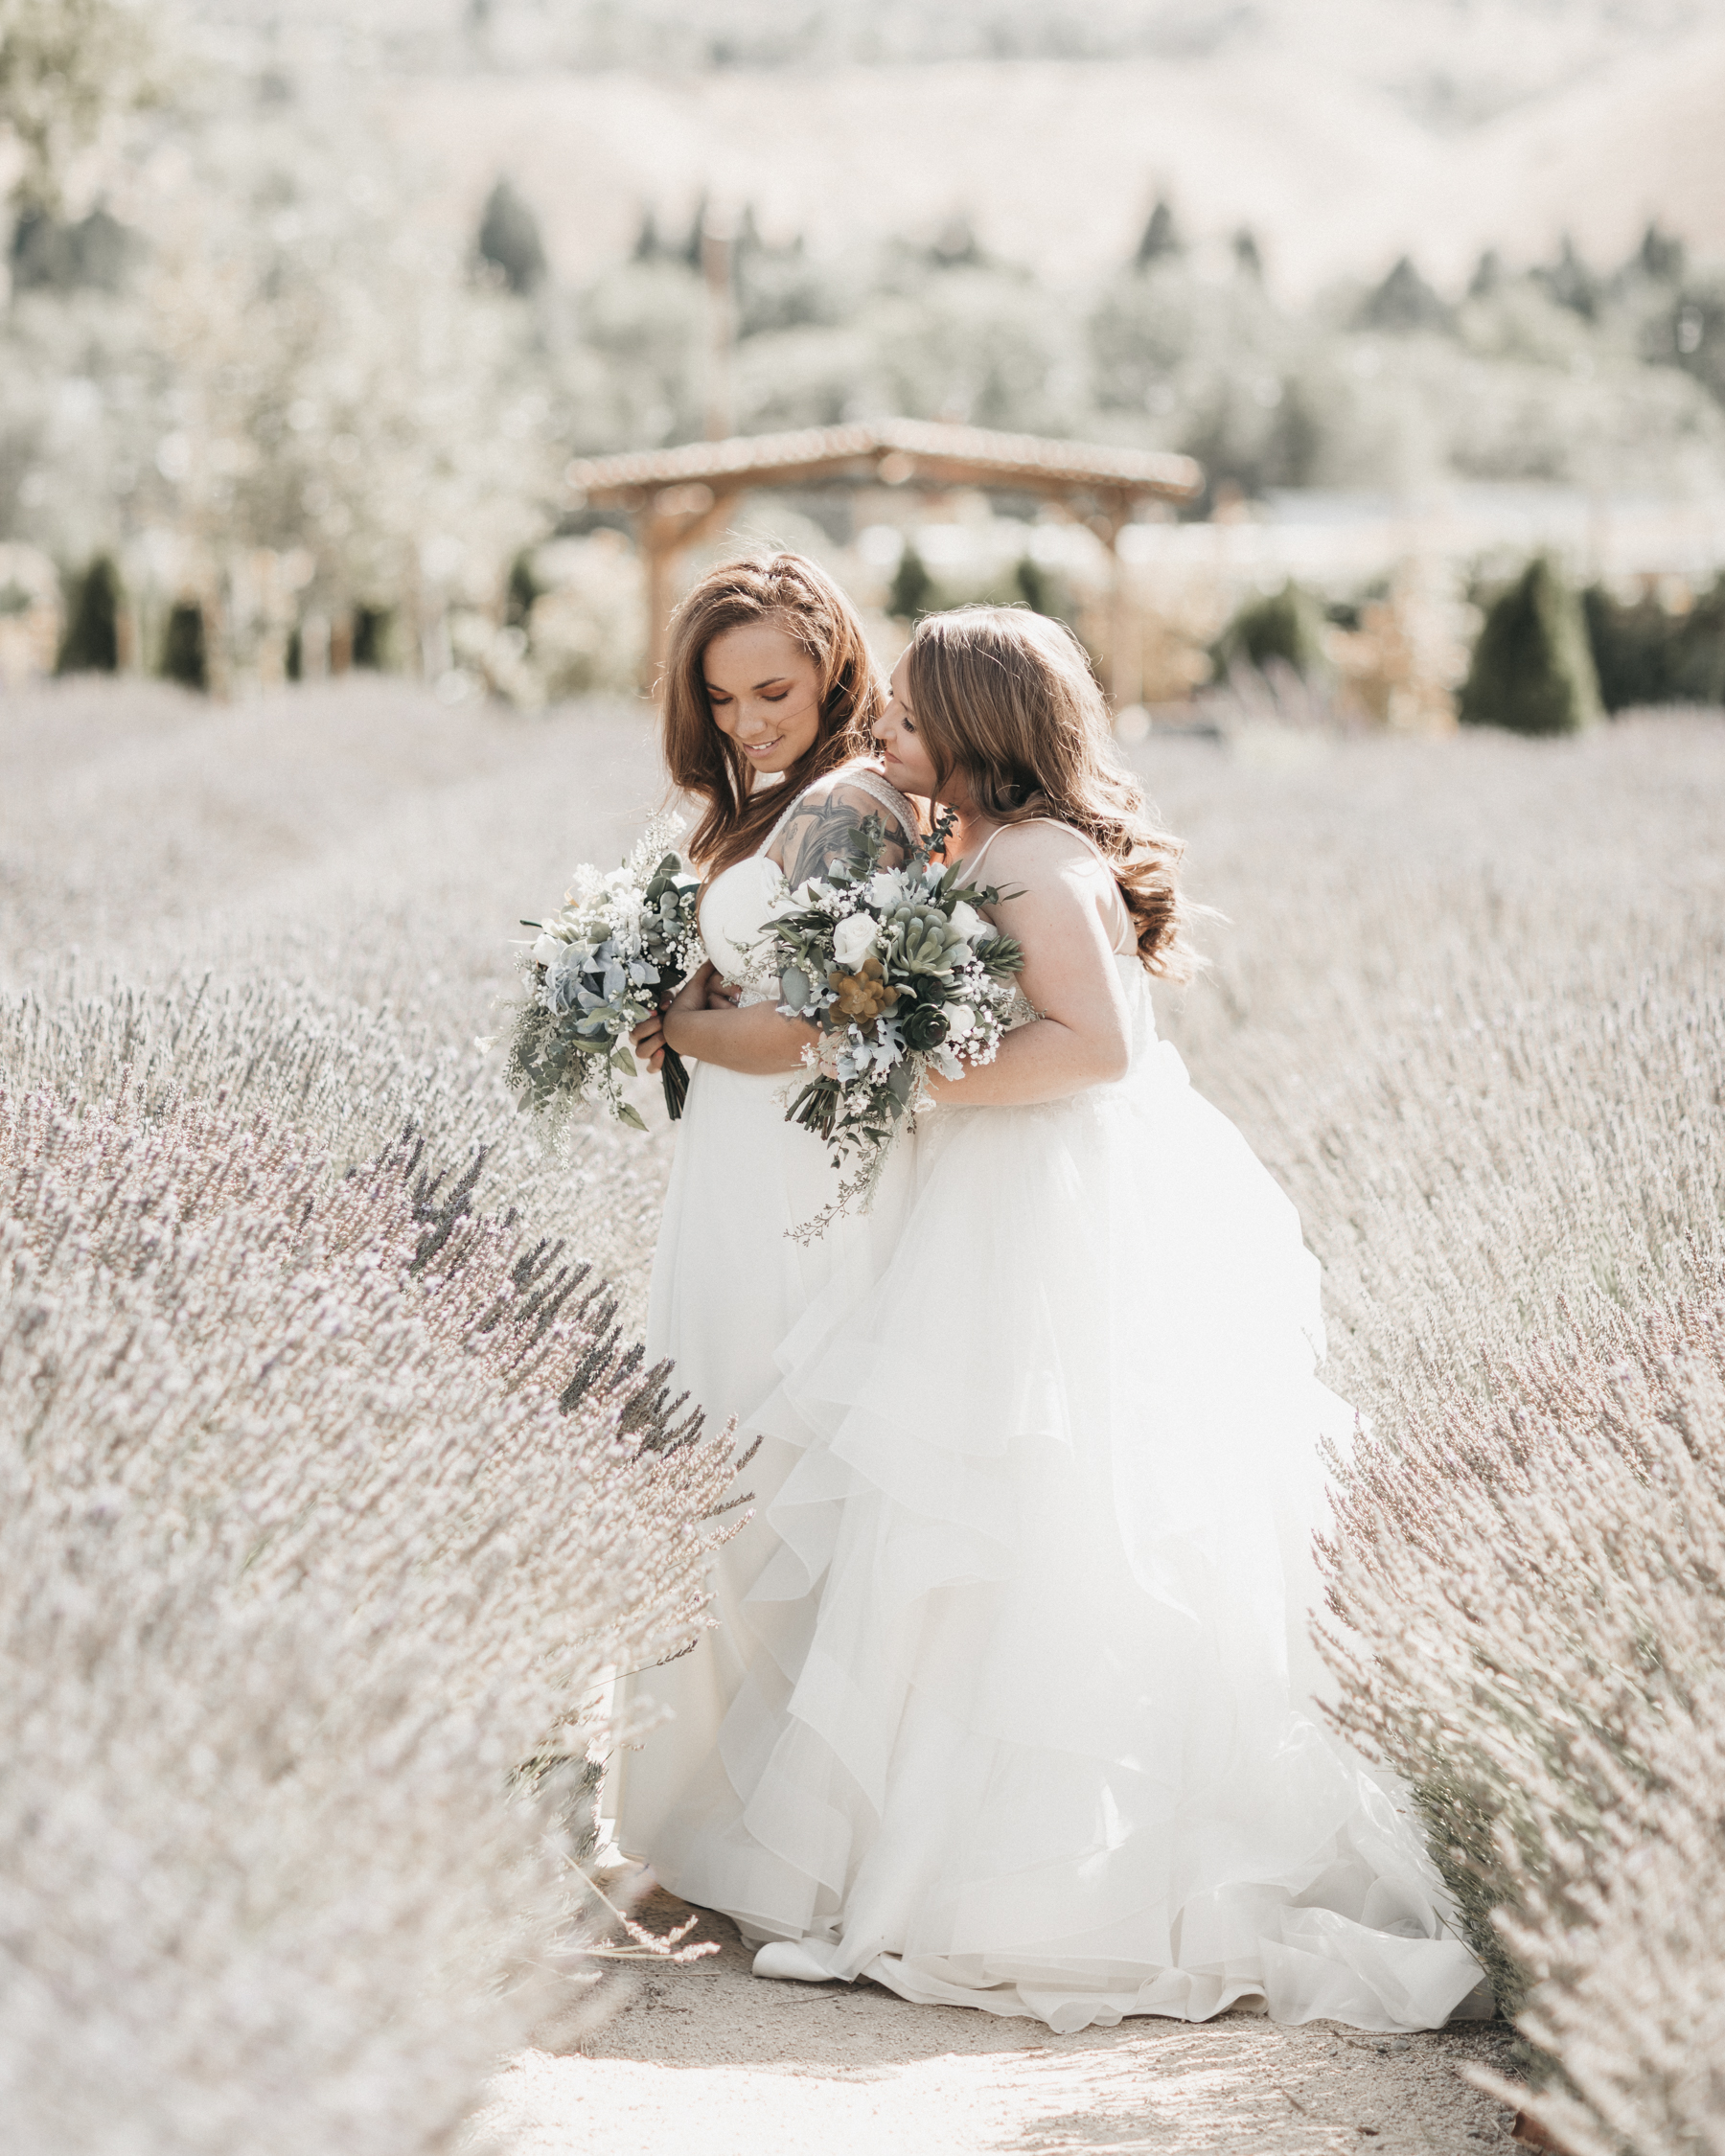 Wedding photography of two brides at Lavender Ridge in Reno, Nevada. Alina and Brittany are both wearing white wedding dresses and have bouquets made of white roses and succulents.